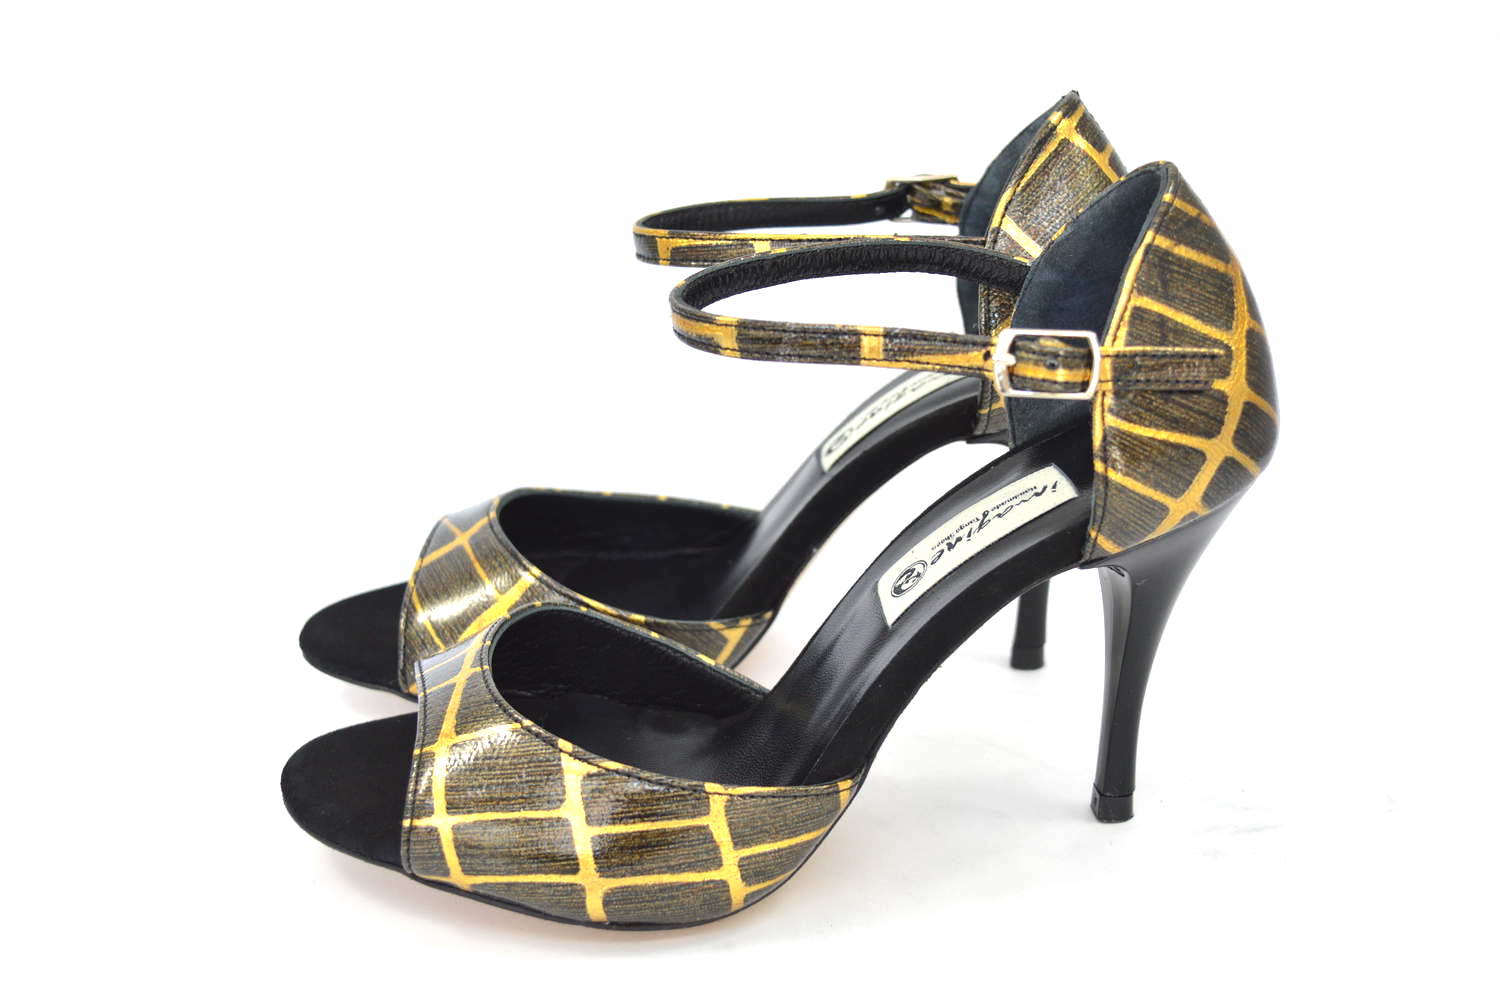 Women Argentine Tango Dance Shoes, in special gold-brown leather and black suede leather